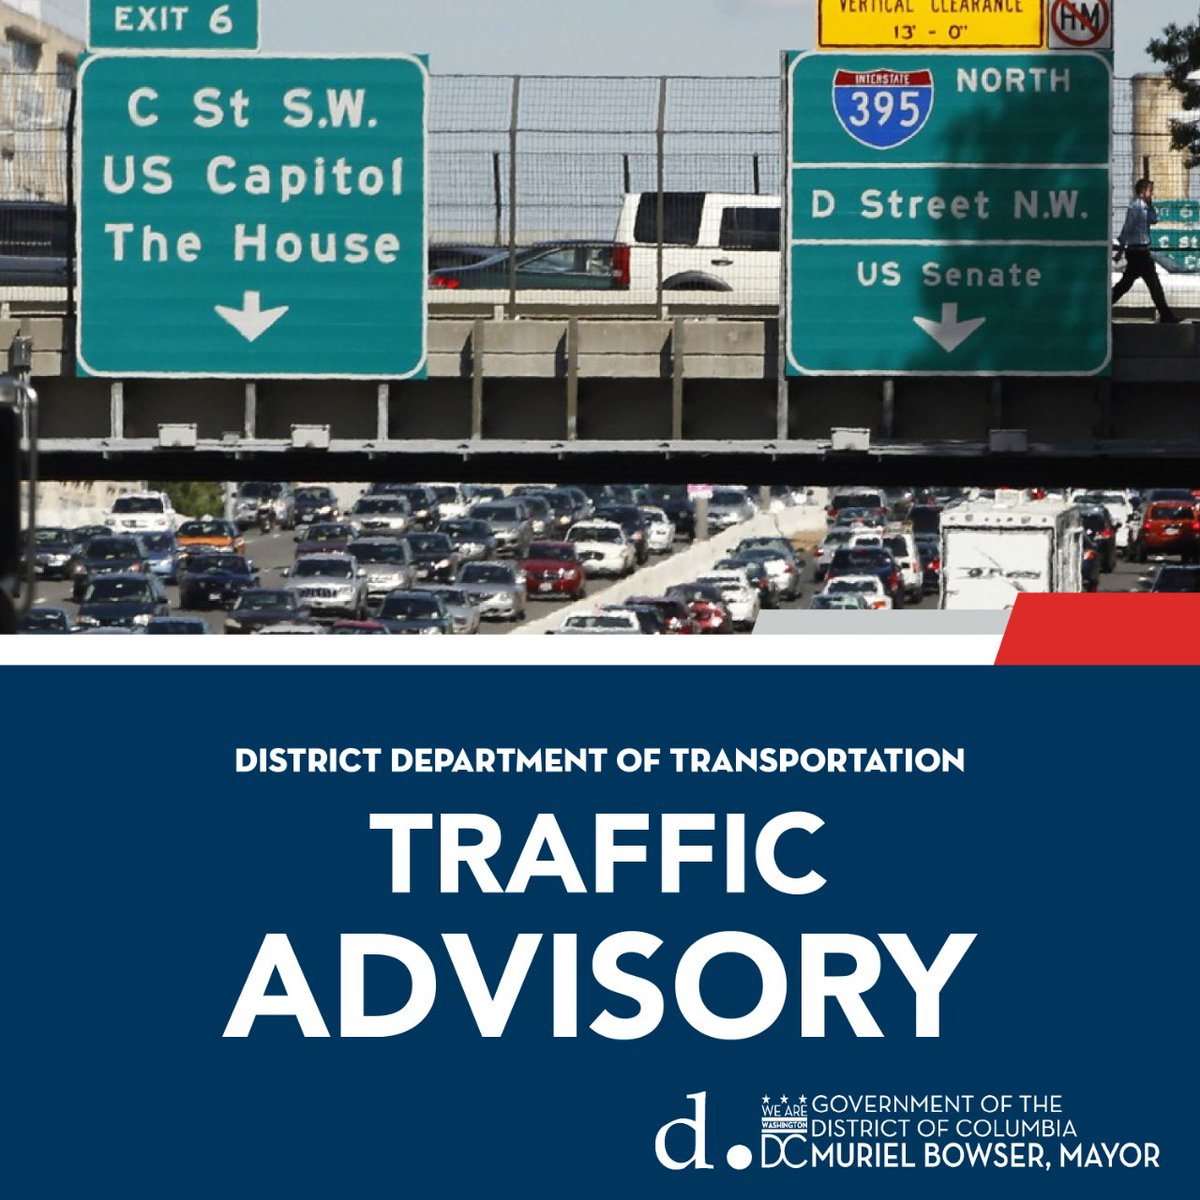 DDOT Traffic Advisory: Temporary Lane Closures for DC Smart Street Lighting Improvement Project from August 21 through October 2023. For a full list of closures, please click the link: ddot.dc.gov/release/traffi…